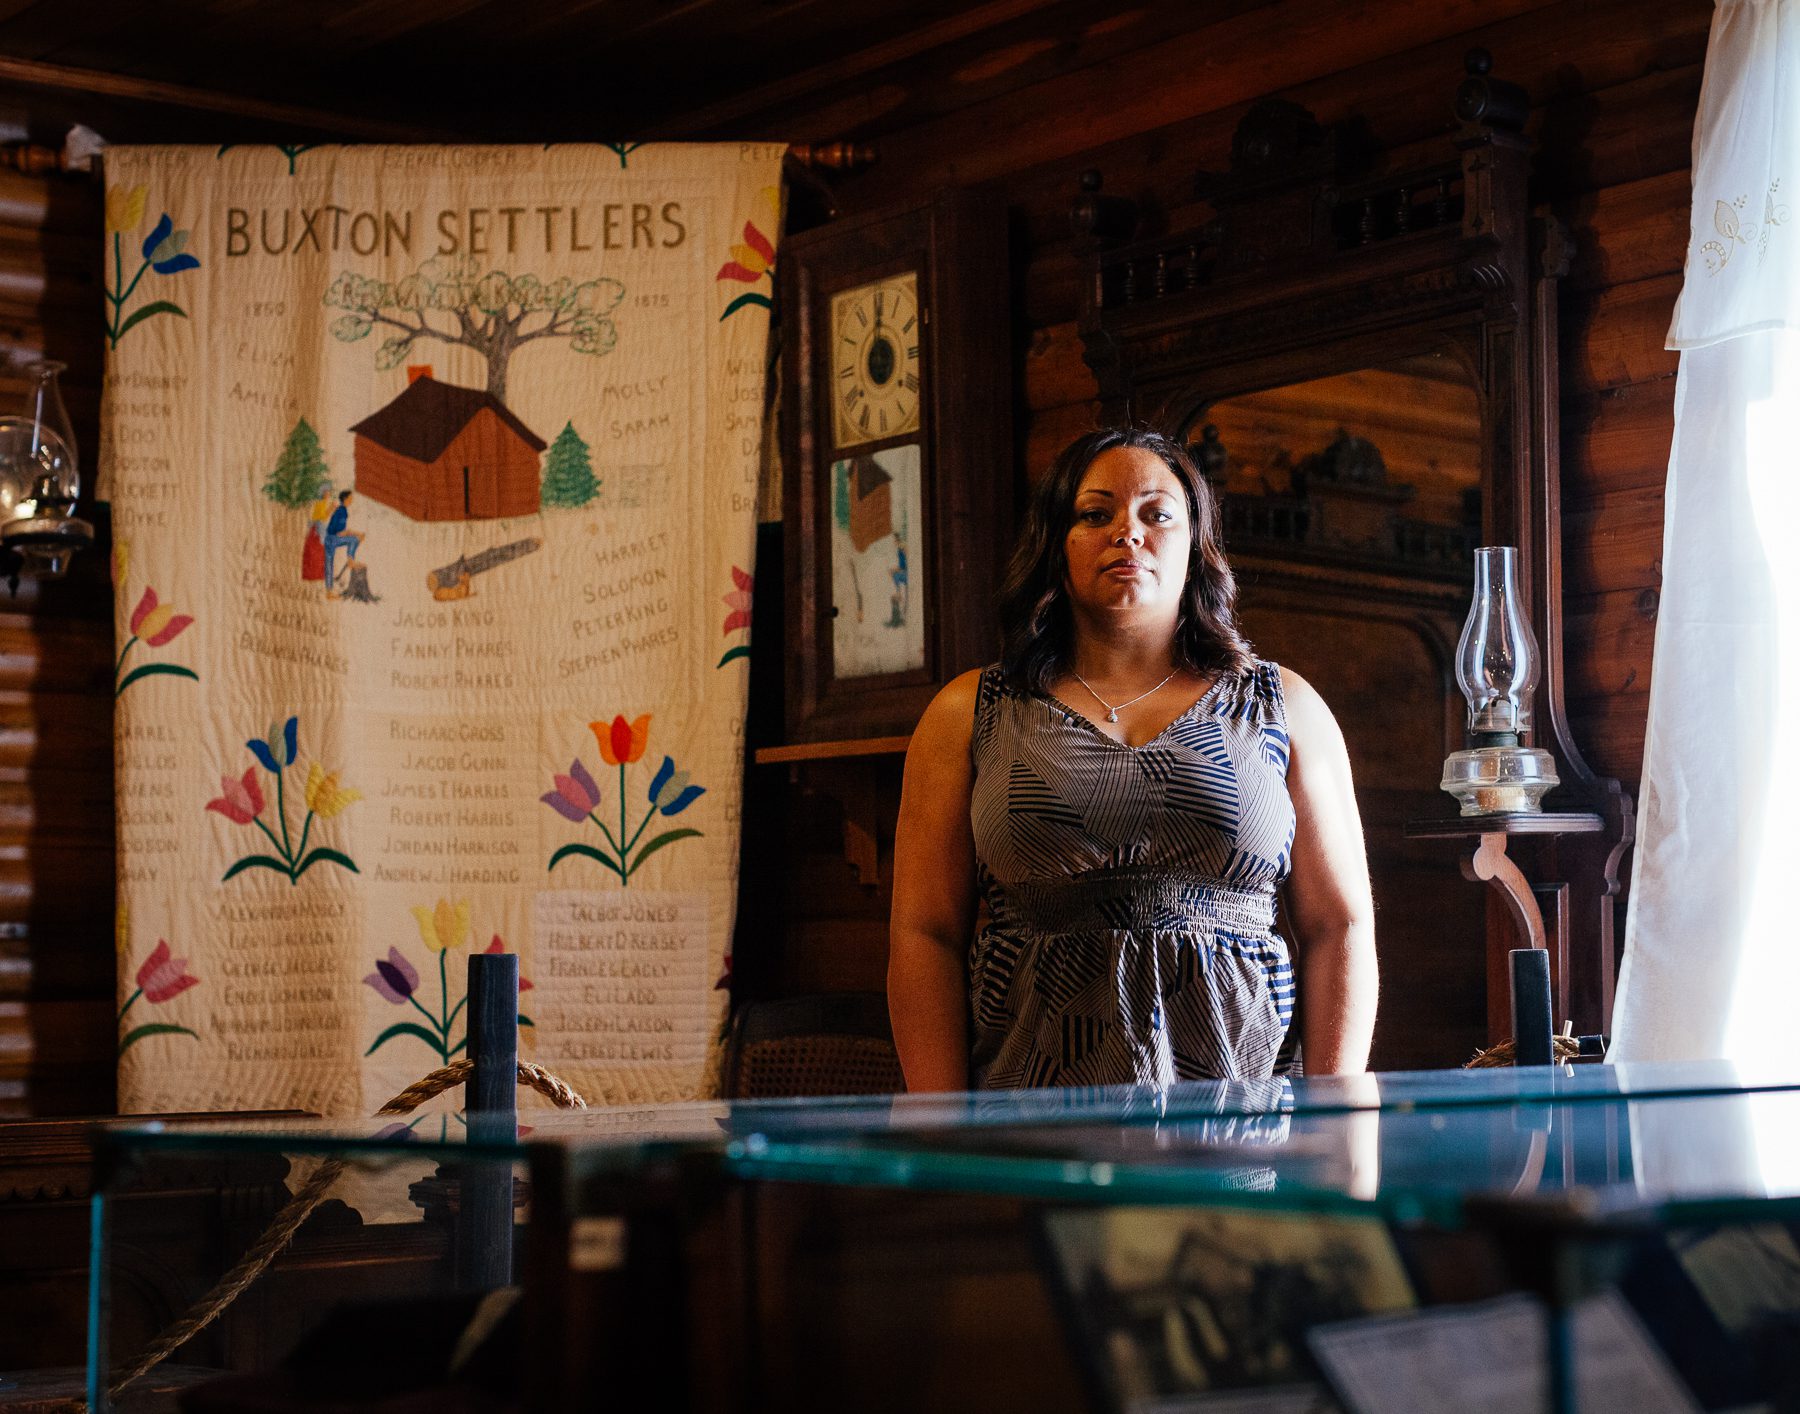  Michelle stands amongst an exhibit in the Buxton National Historic Museum opened in 1967 to collect, preserve, exhibit, and interpret historical artifacts related to the community settlers and their descendants.